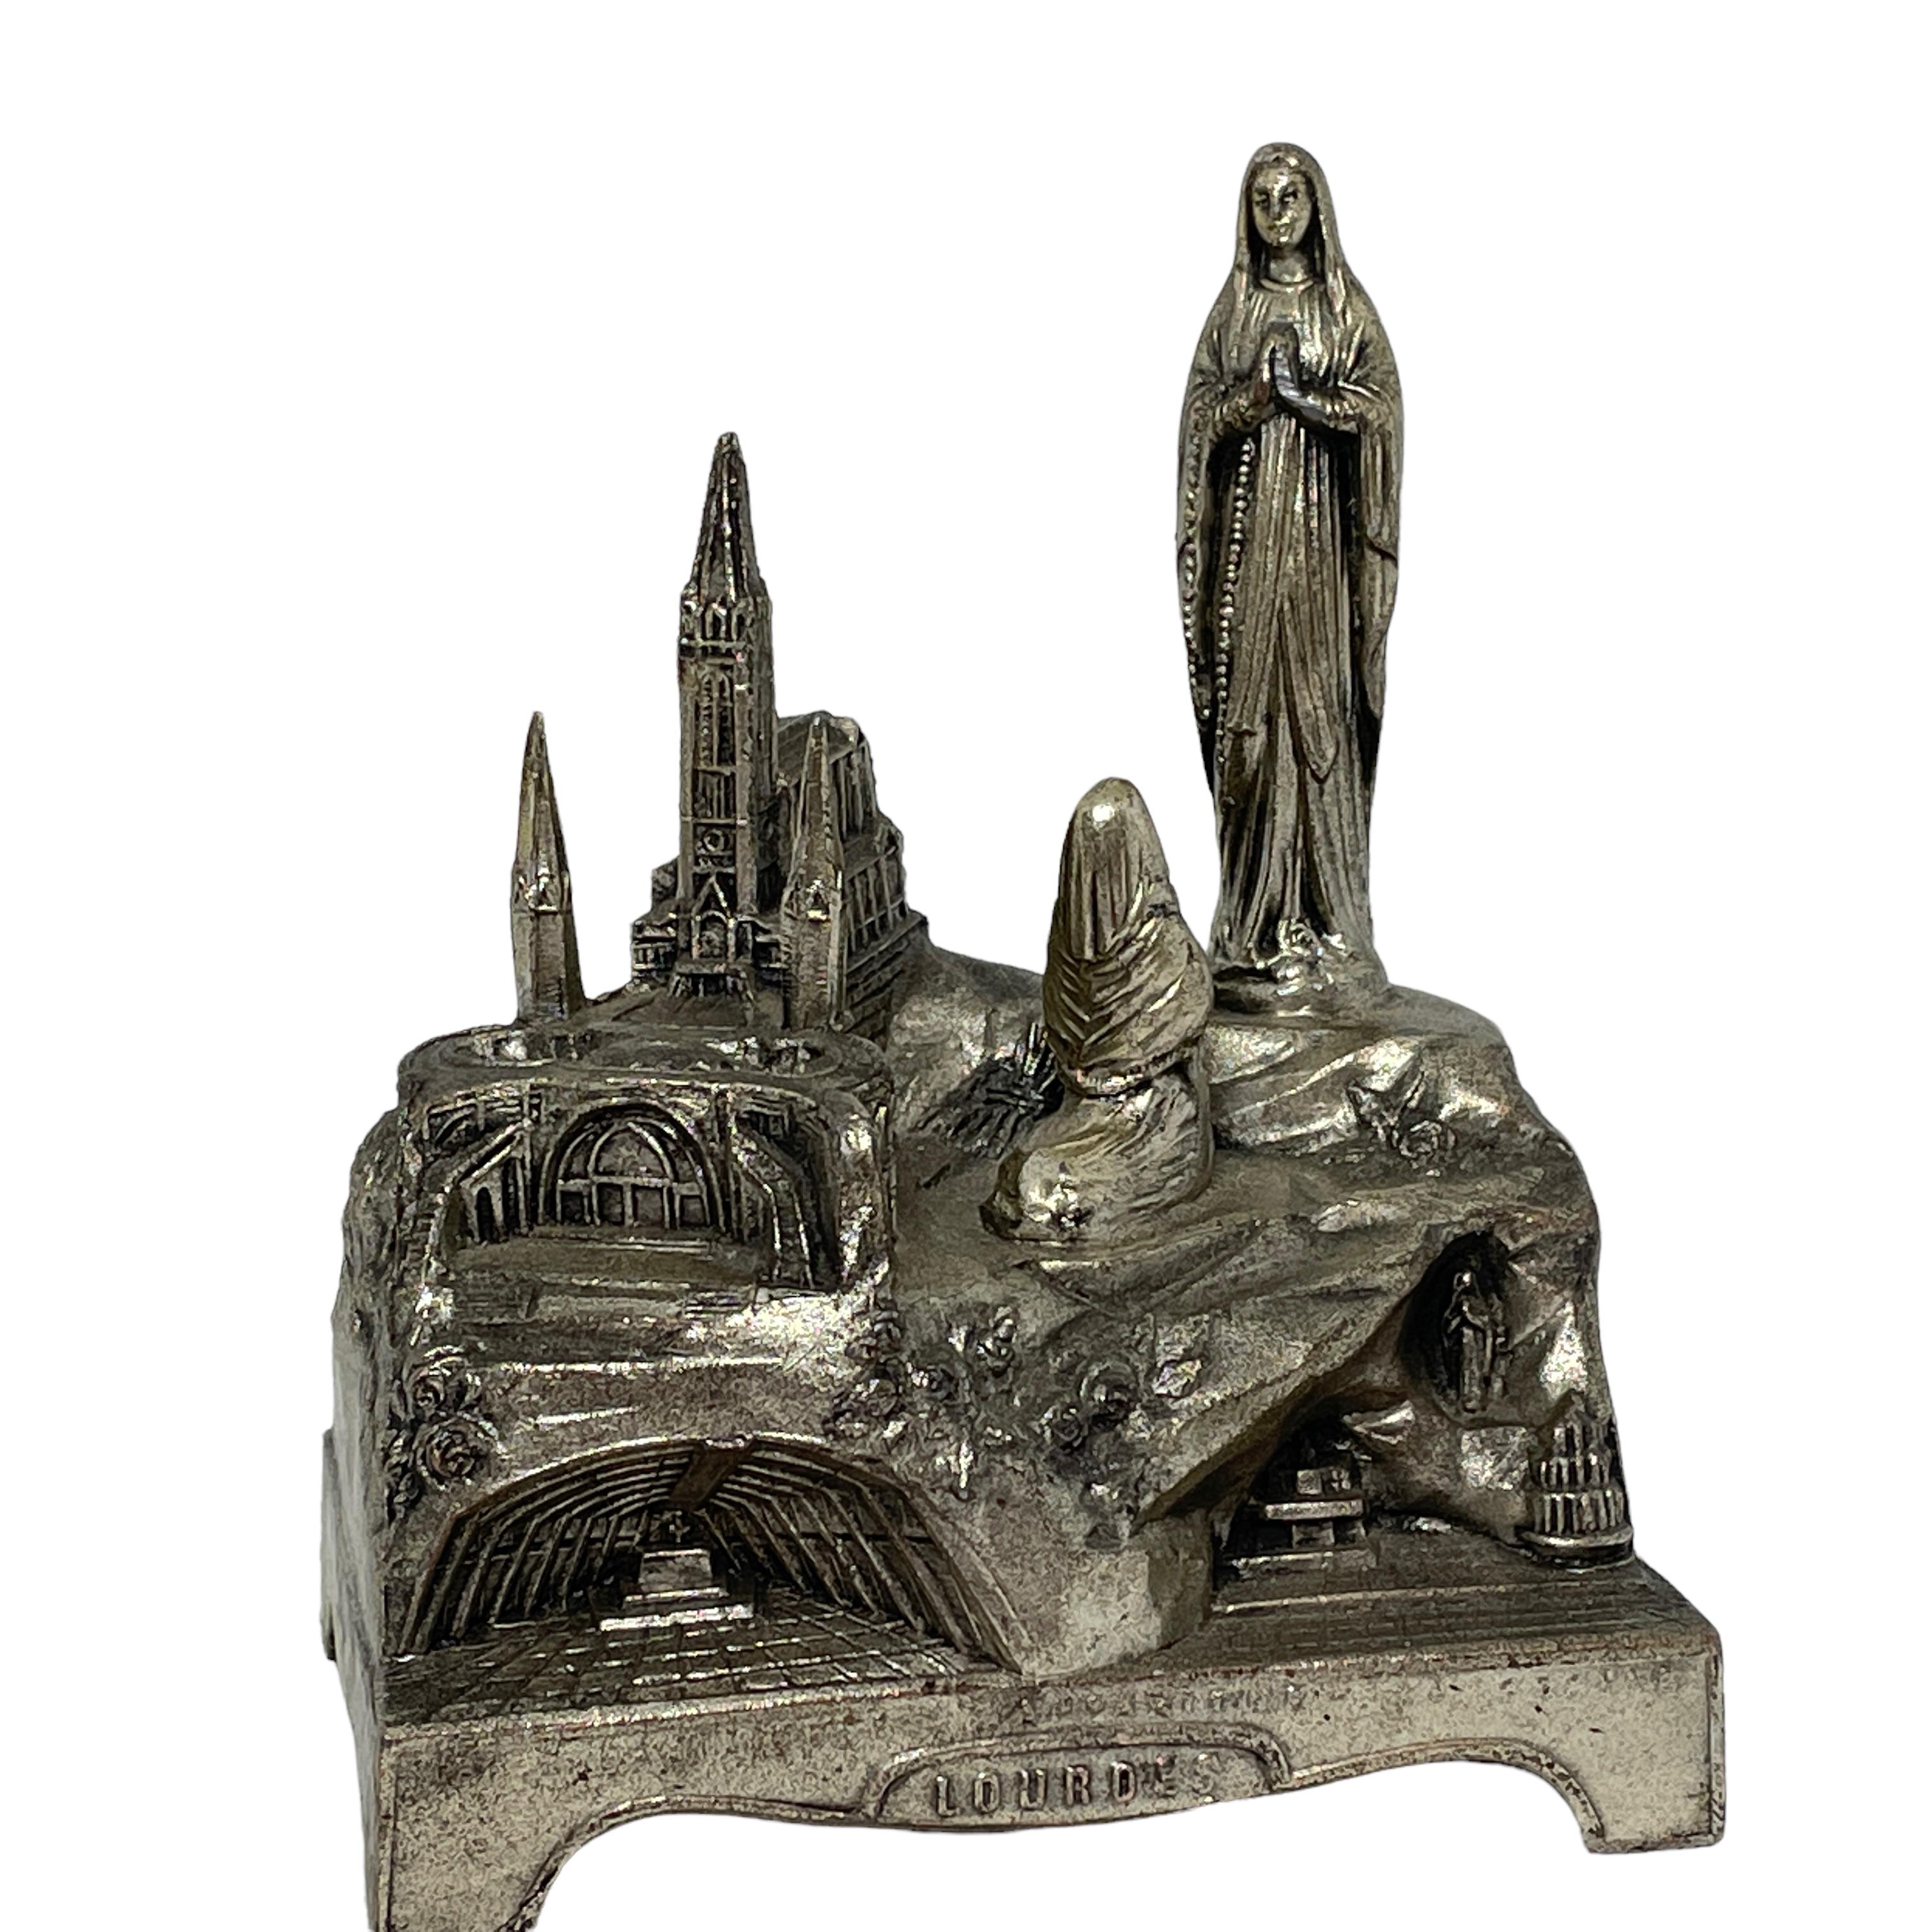 This vintage silvered Music Box was a souvenir from a pilgrims journey to the famous City of Lourdes in France. It is made of metal and wood. The music box plays a nice melody and is in working condition. A nice addition to any collection.
 